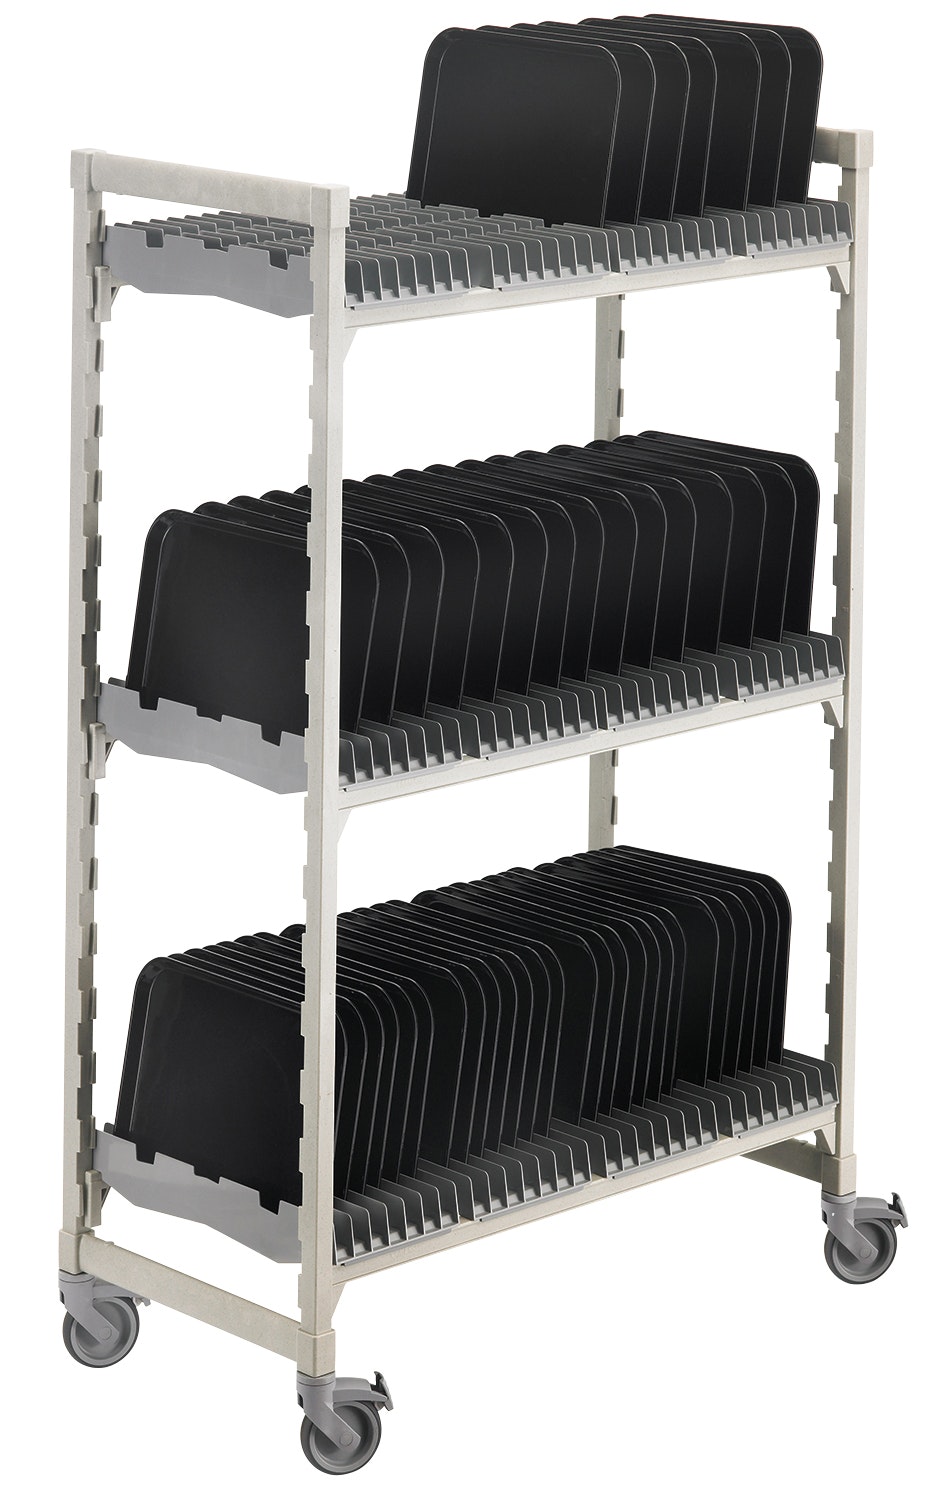 The Complete Sanitary Drying Rack for Healthcare Kitchens - the CAMBRO blog